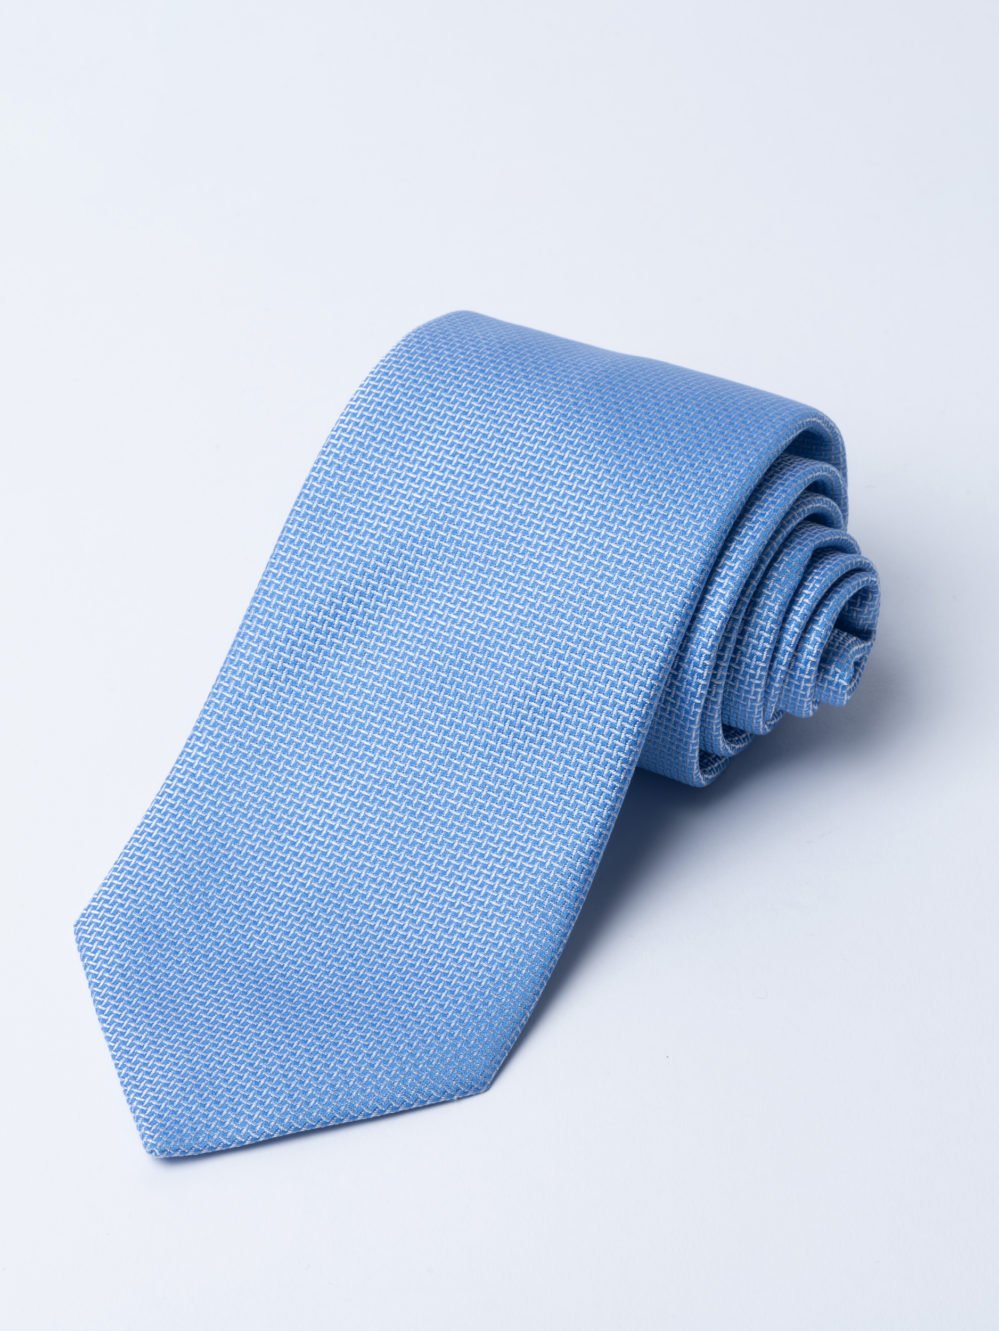 Pale blue Cundey weave tie - Henry Poole Savile Row